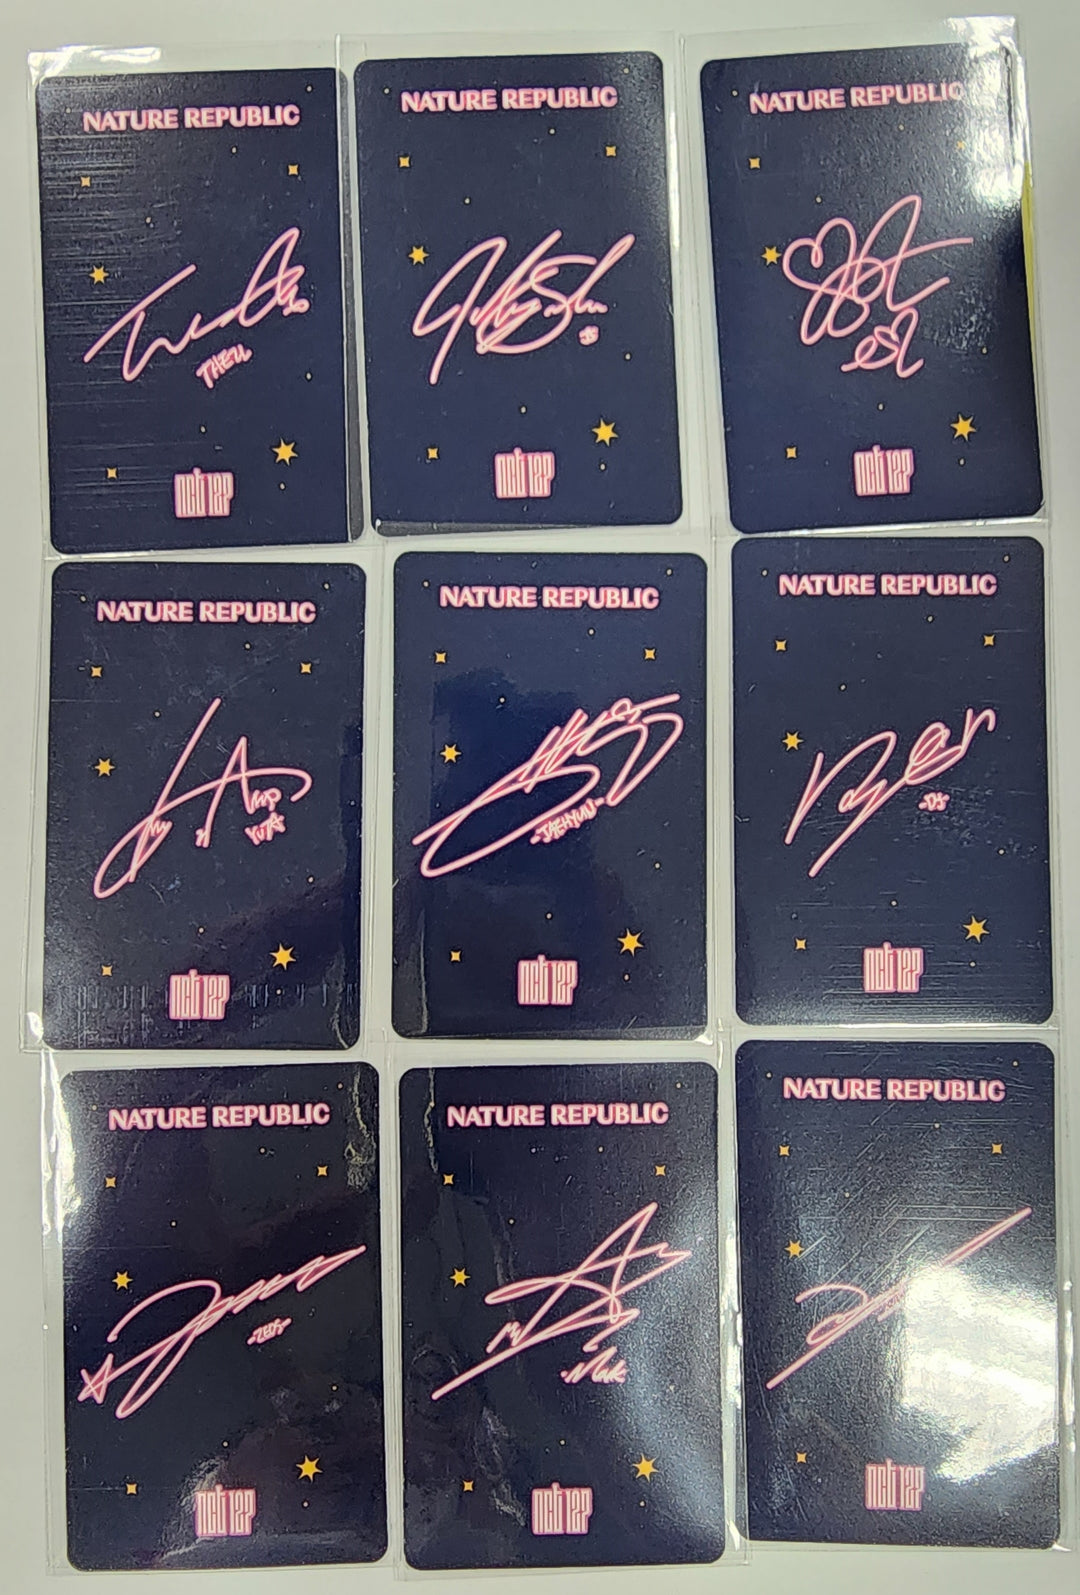 NCT 127 "NCT 127 X NATURE REPUBLIC" - Selfie Photocard Promotion Event Photocard